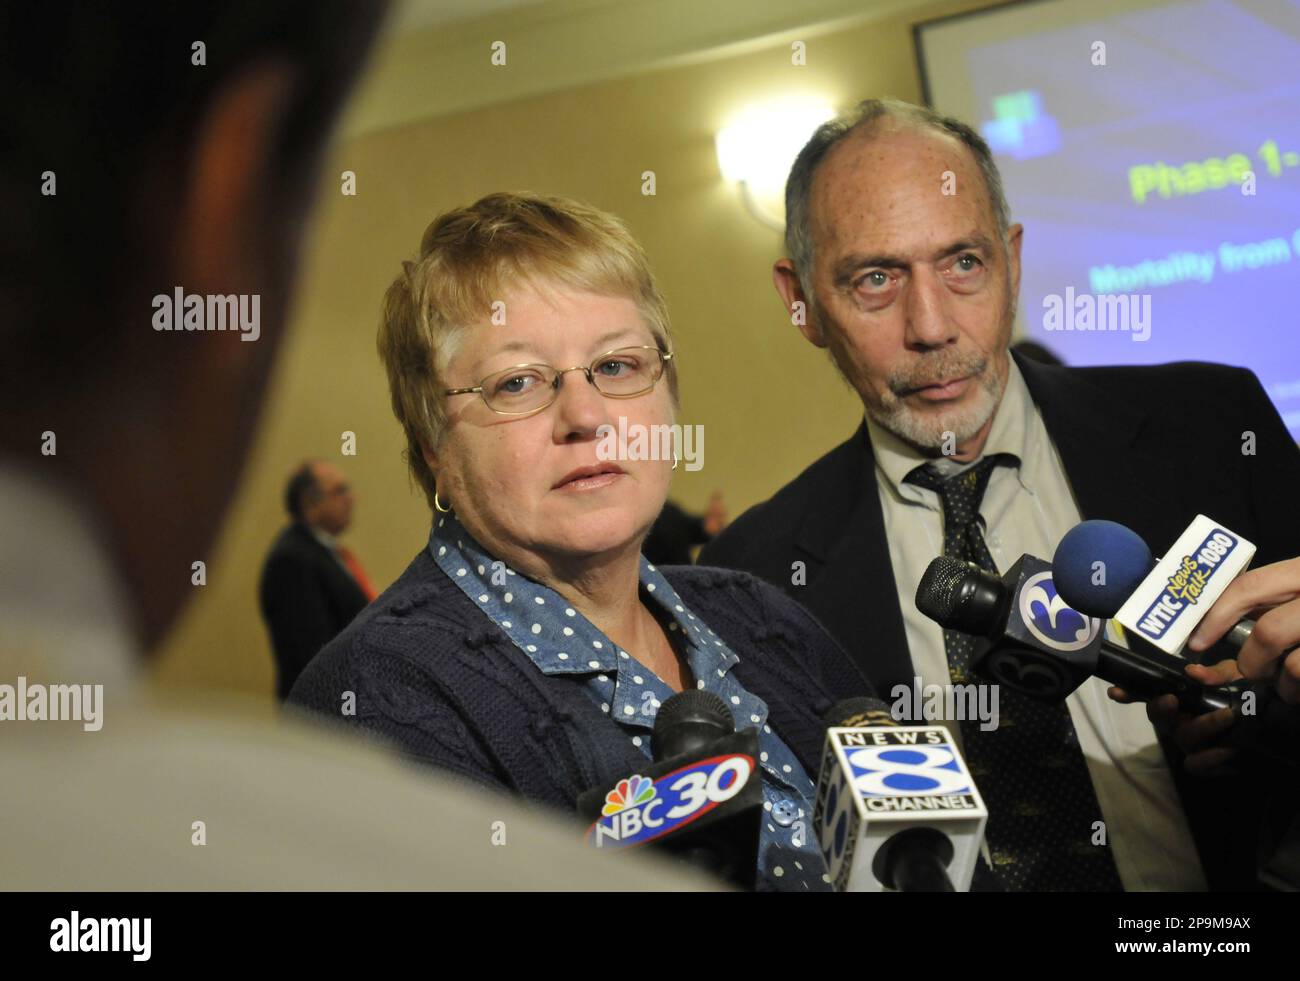 Carol Shea, left, who lost her husband to brain cancer, and